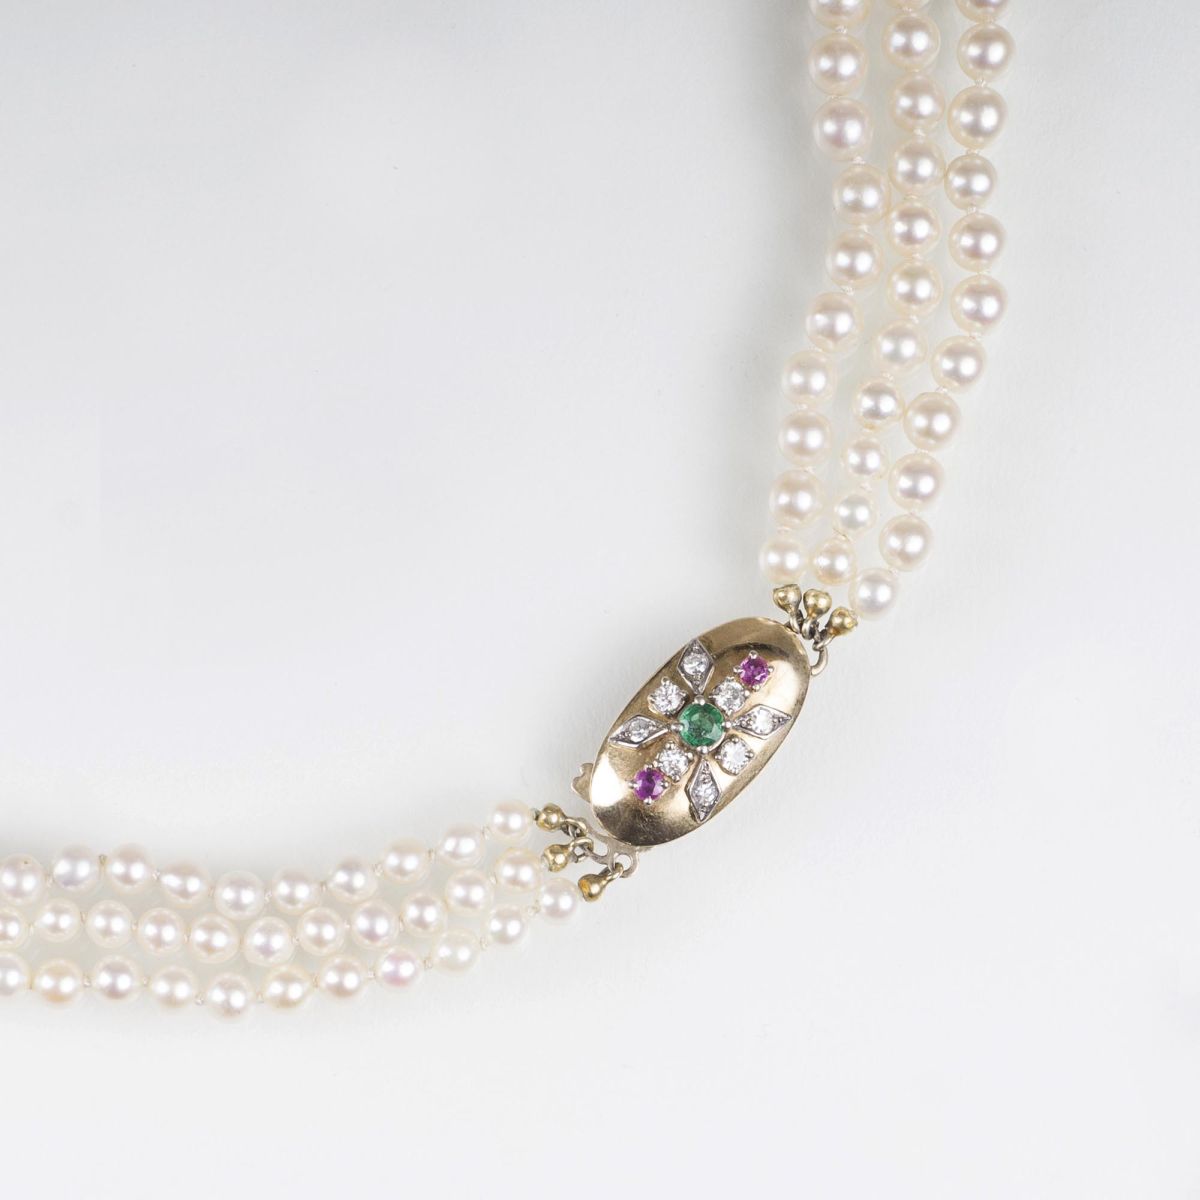 A Pearl Necklace with Precious Stone Clasp